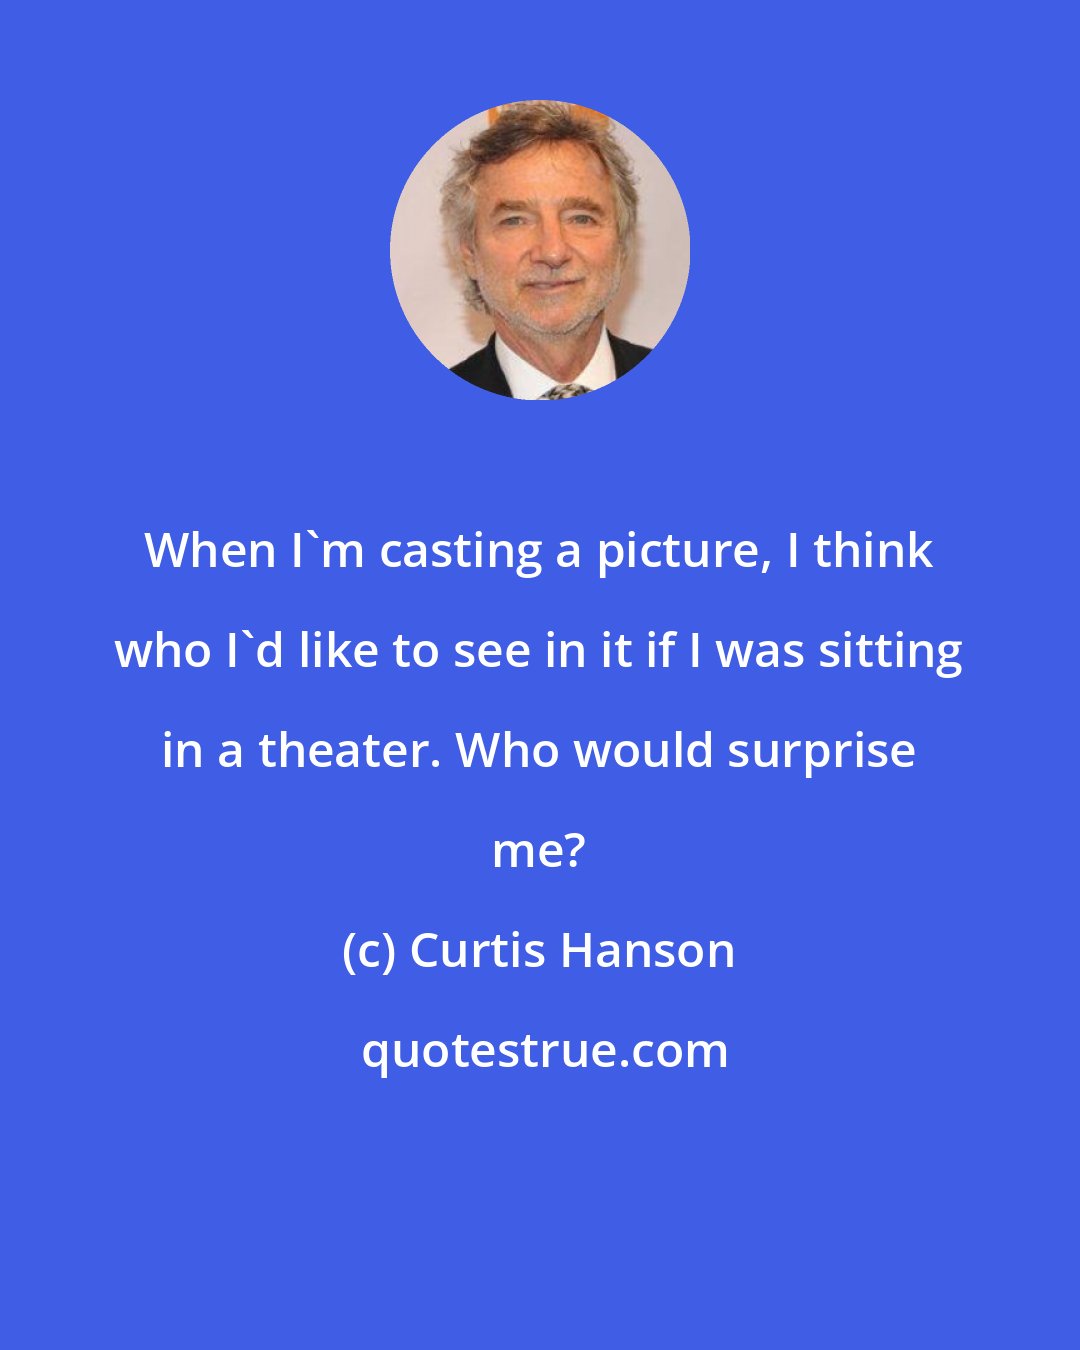 Curtis Hanson: When I'm casting a picture, I think who I'd like to see in it if I was sitting in a theater. Who would surprise me?